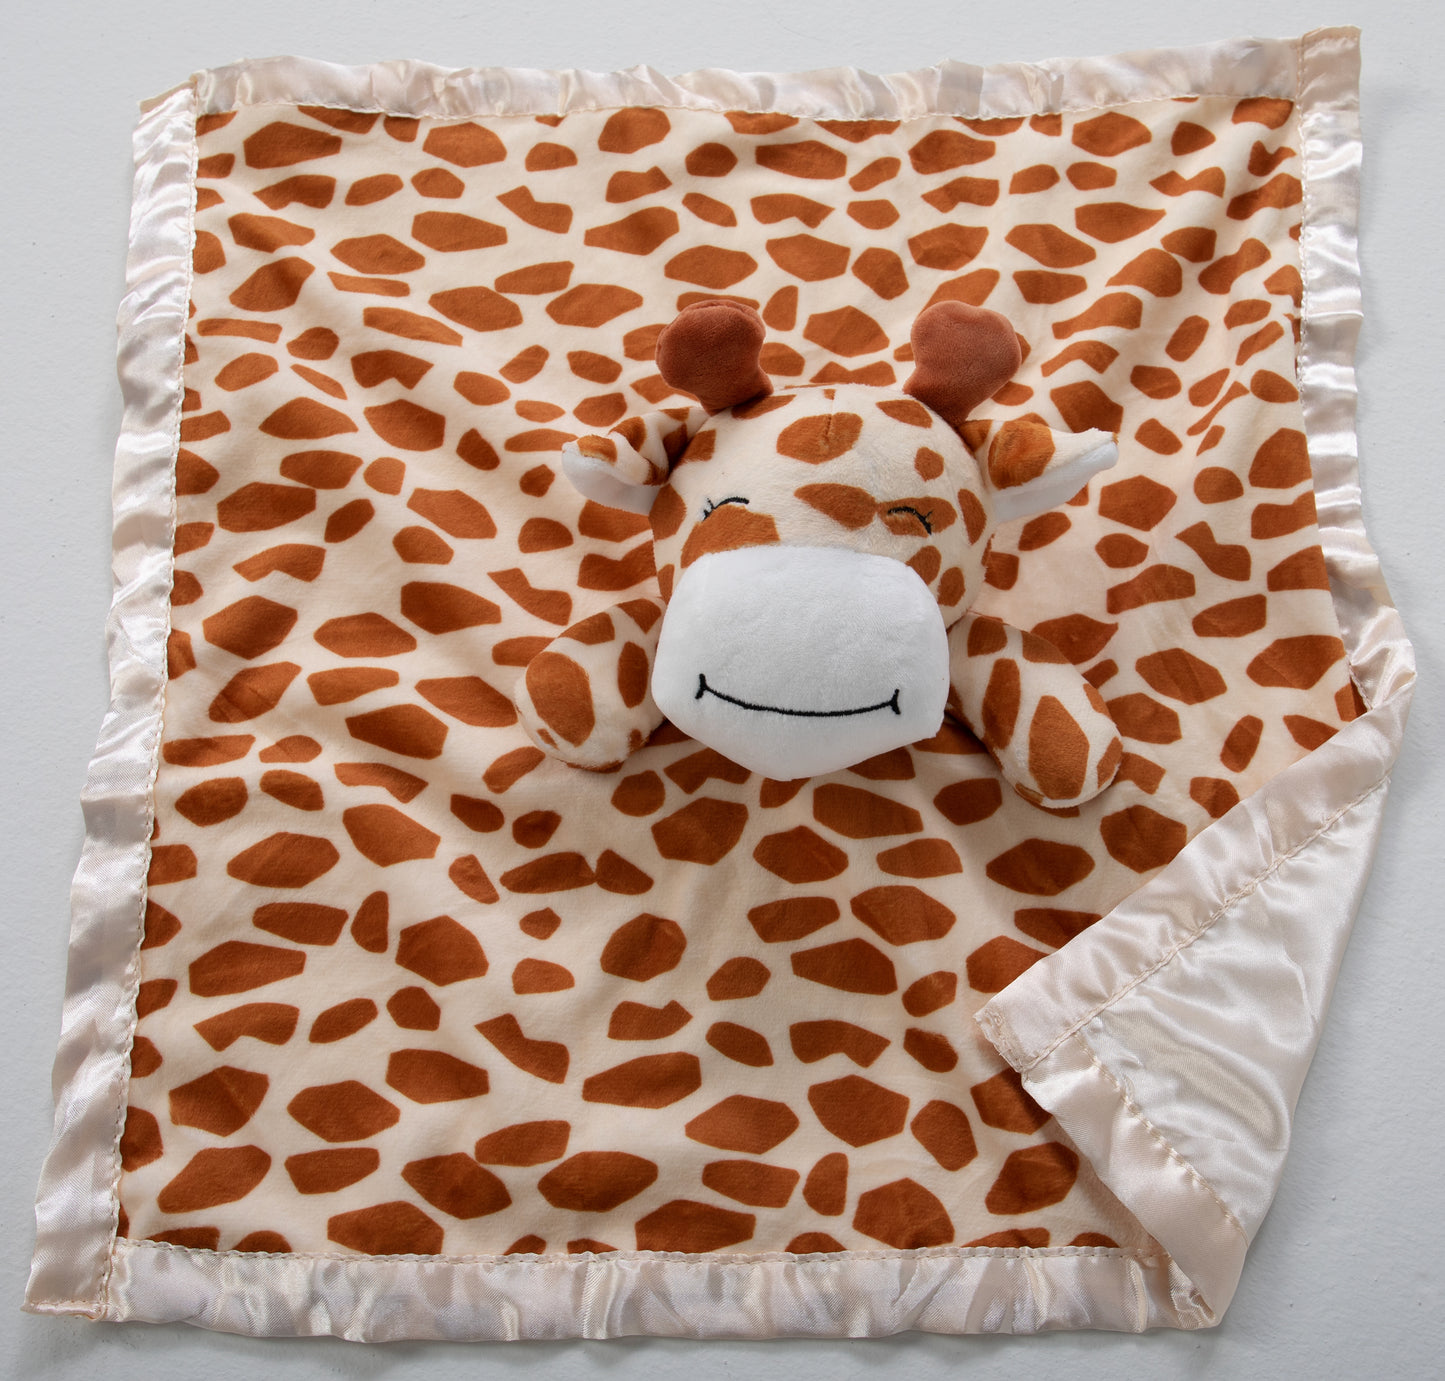 This plush giraffe isn't just for cuddles; it's a versatile companion. Whether it's used as a bedtime buddy, a decorative accent in a nursery, a security blanket or a loyal travel companion, it will always bring comfort and joy.  Individual Giraffe Lovey: 16" W x 16" H